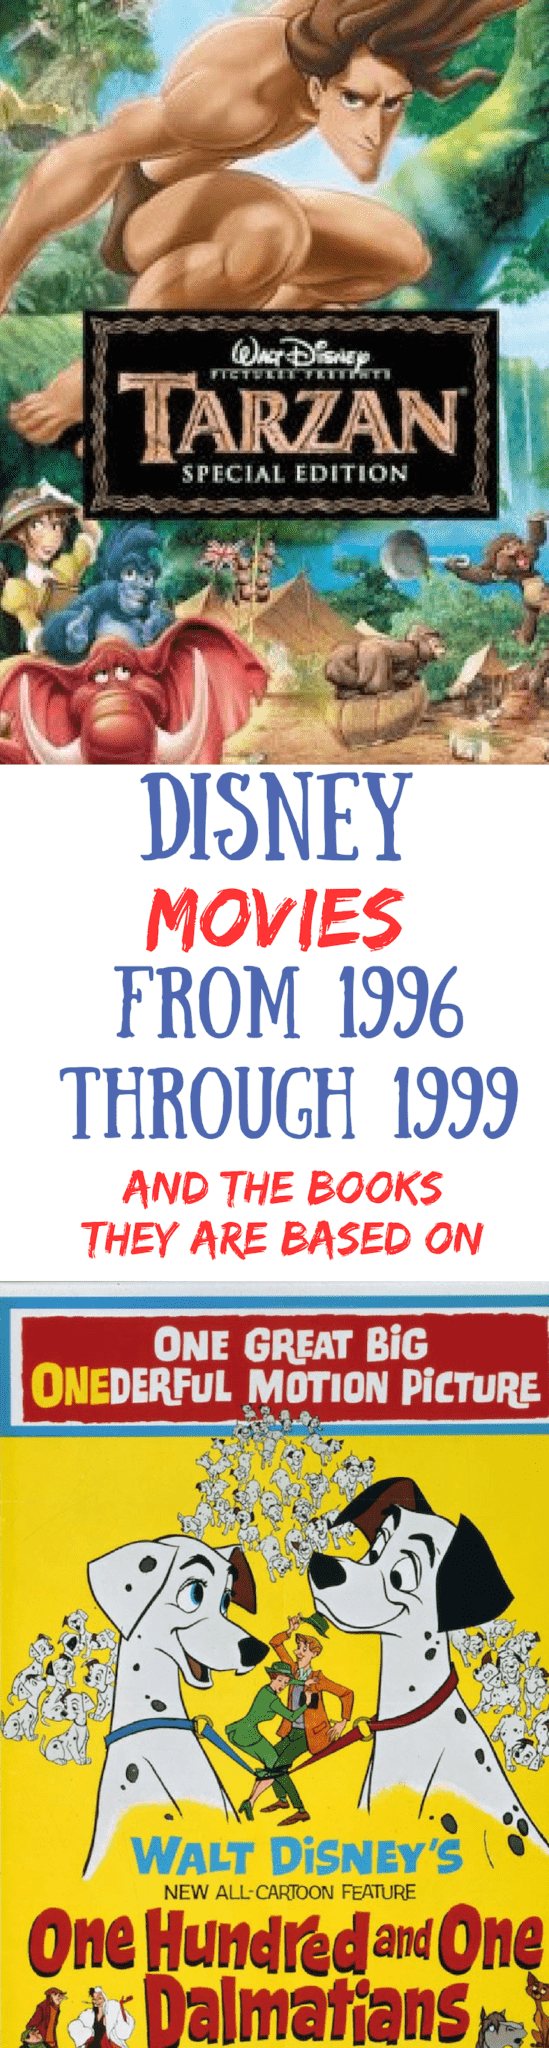 list-of-disney-movies-in-chronological-order-part-6-1996-1999-a-mother-s-random-thoughts